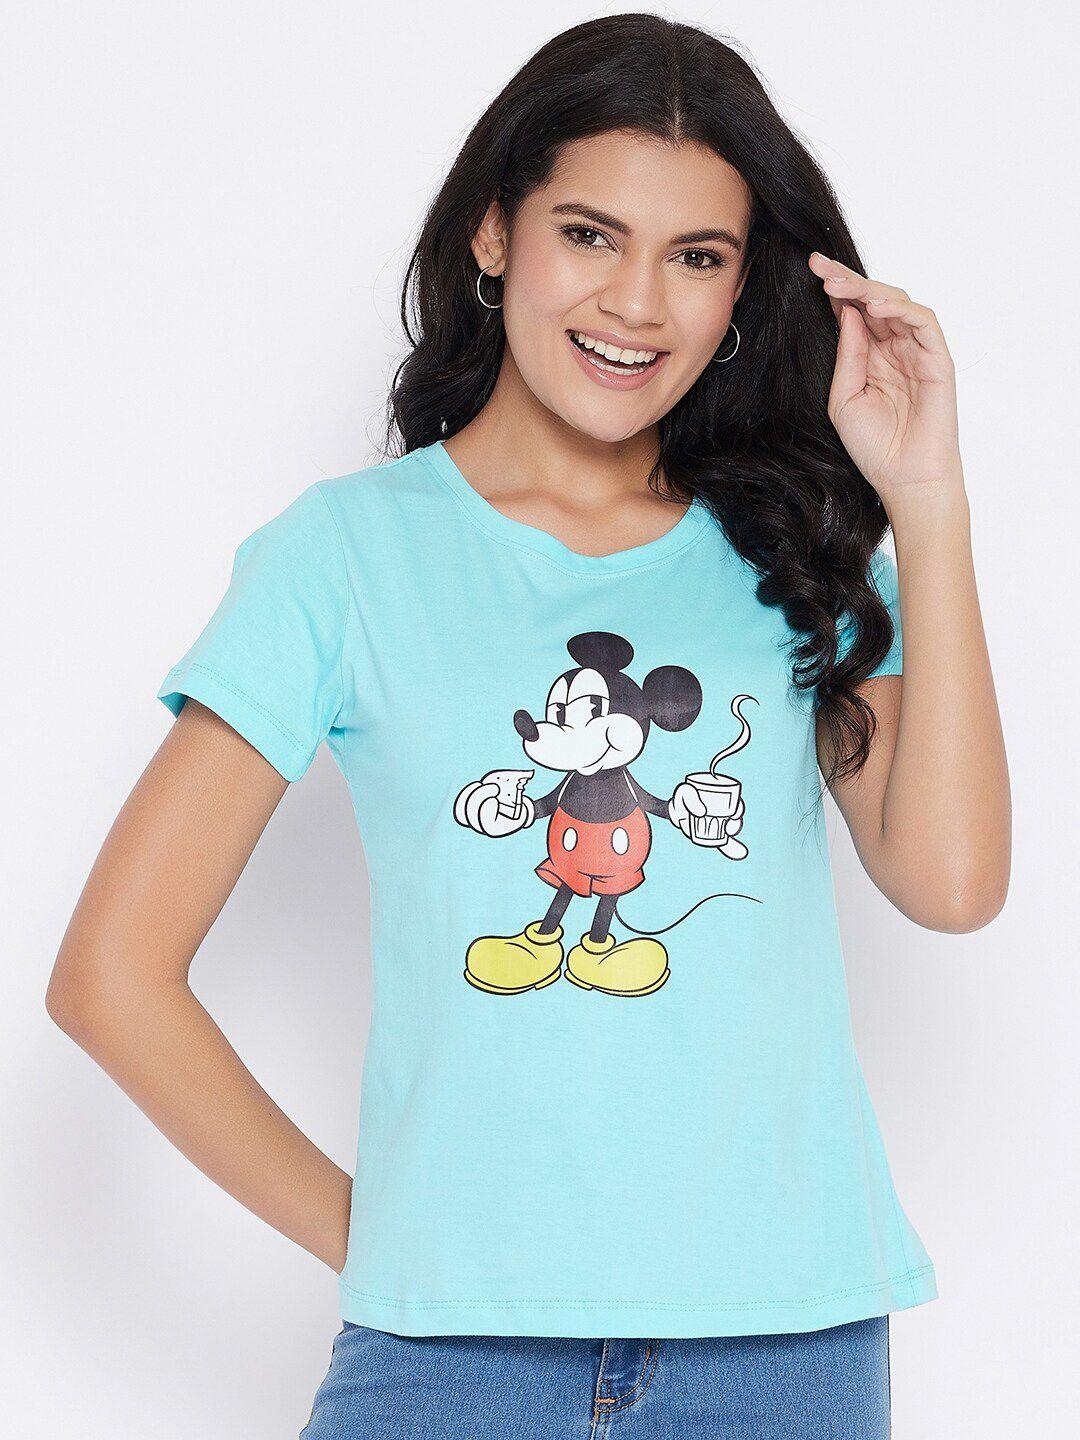 disney-by-wear-your-mind-women-blue-printed-t-shirt